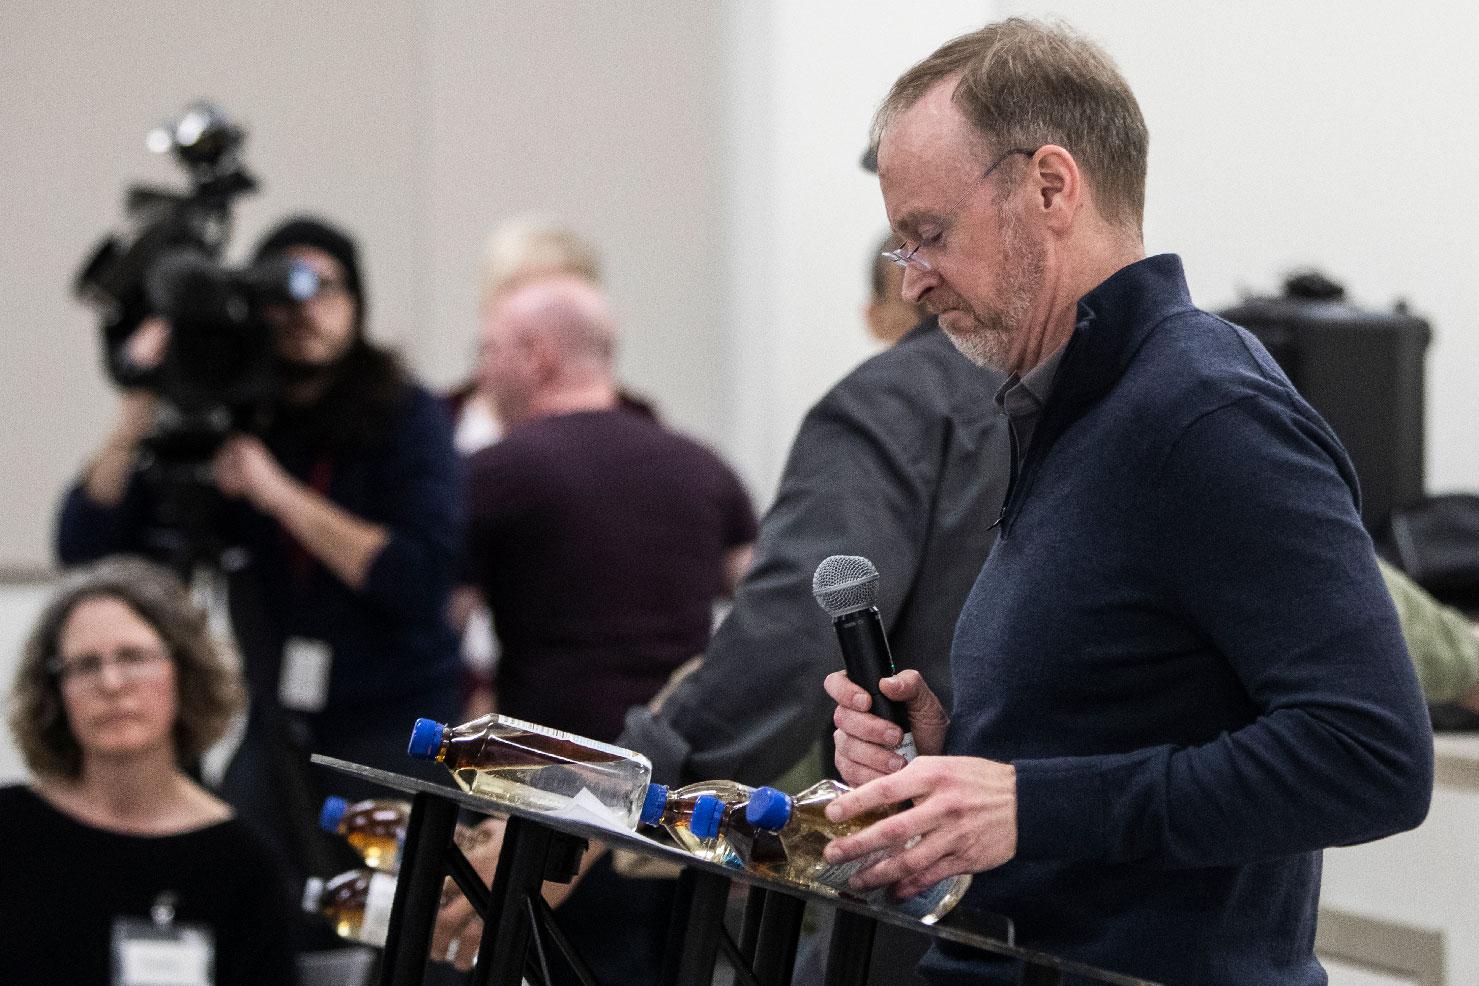 Imperial Oil's vice-president of oilsands mining Jamie Long looks at bottles of oily water placed on his lectern during a meeting in Fort Chipewyan to address the Kearl oilsands tailings leak.